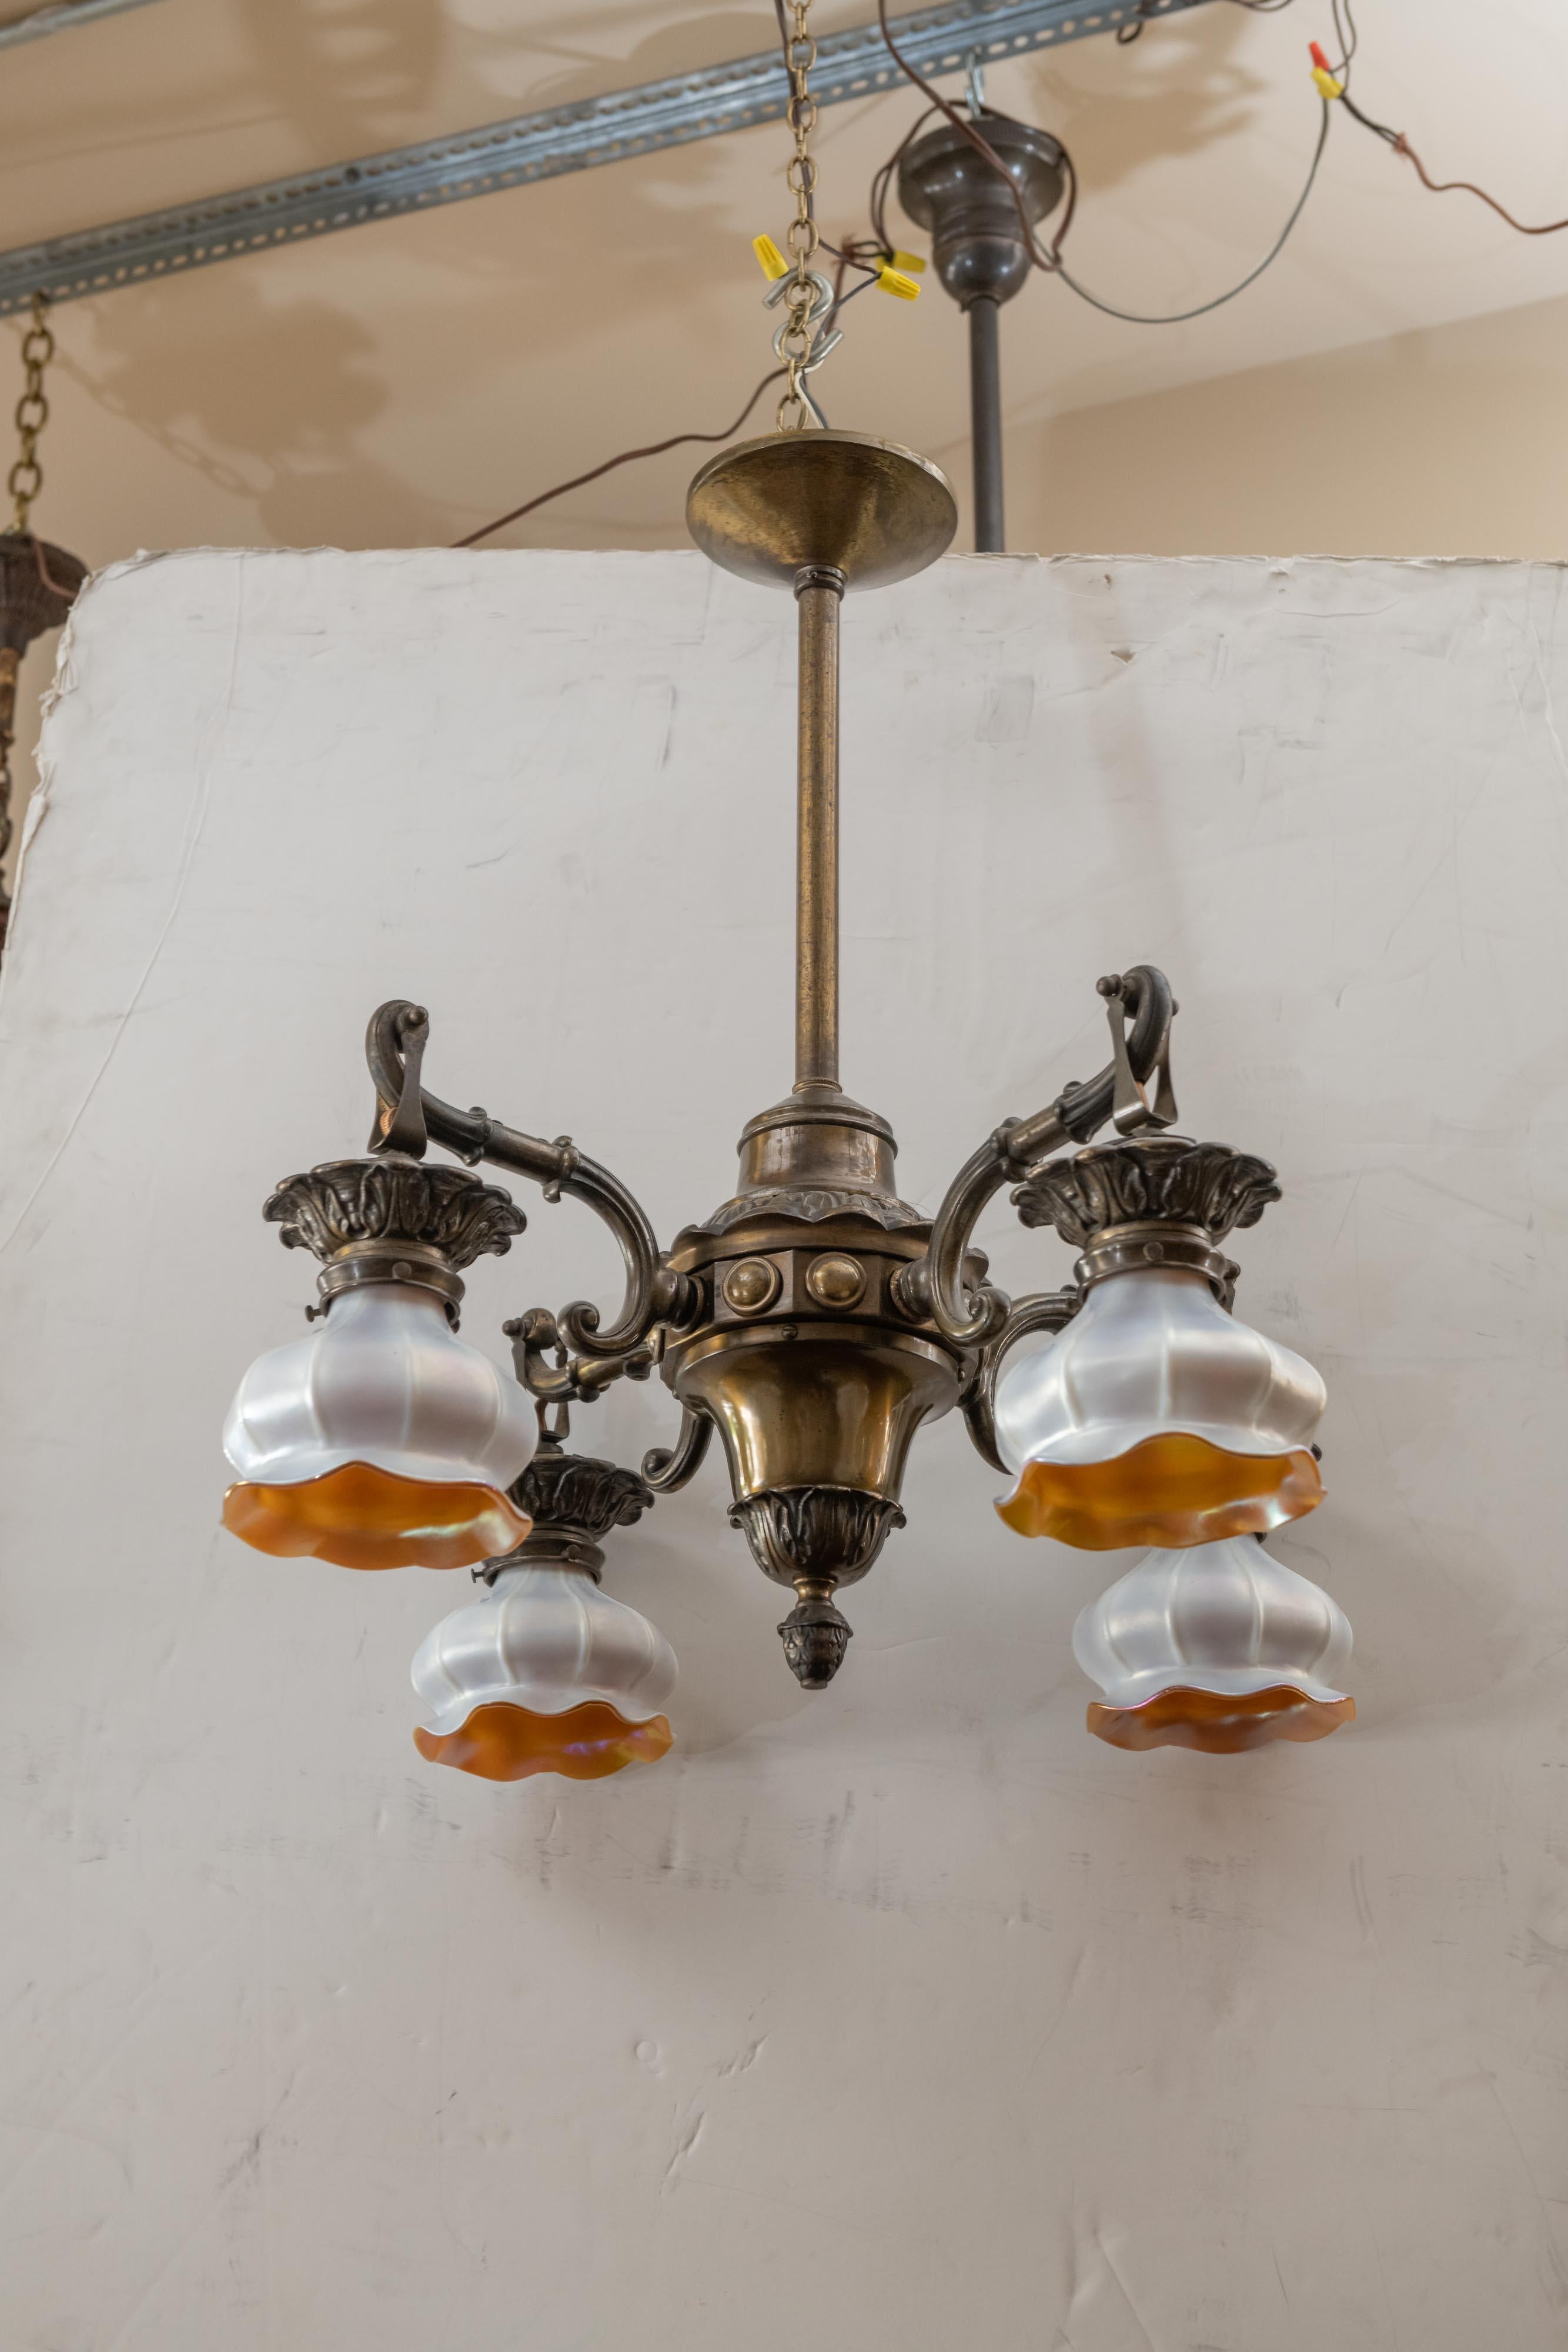 Hand-Crafted 4-Arm Arts and Crafts Chandelier with 4 Steuben Art Glass Shades, circa 1910